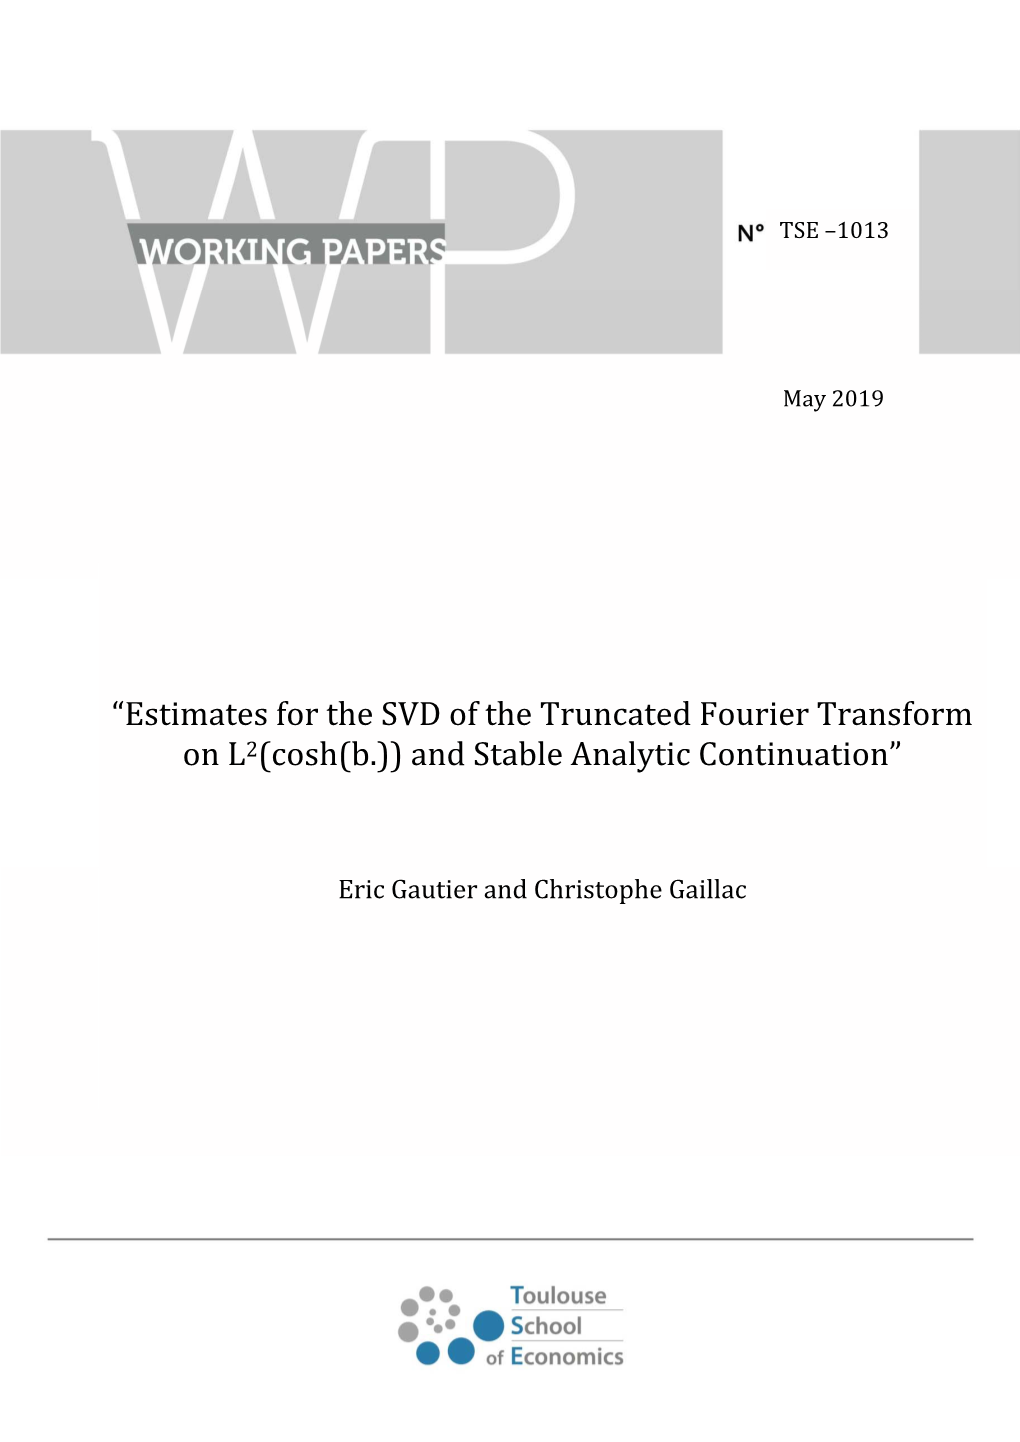 Estimates for the SVD of the Truncated Fourier Transform on L2(Cosh(B.)) and Stable Analytic Continuation”